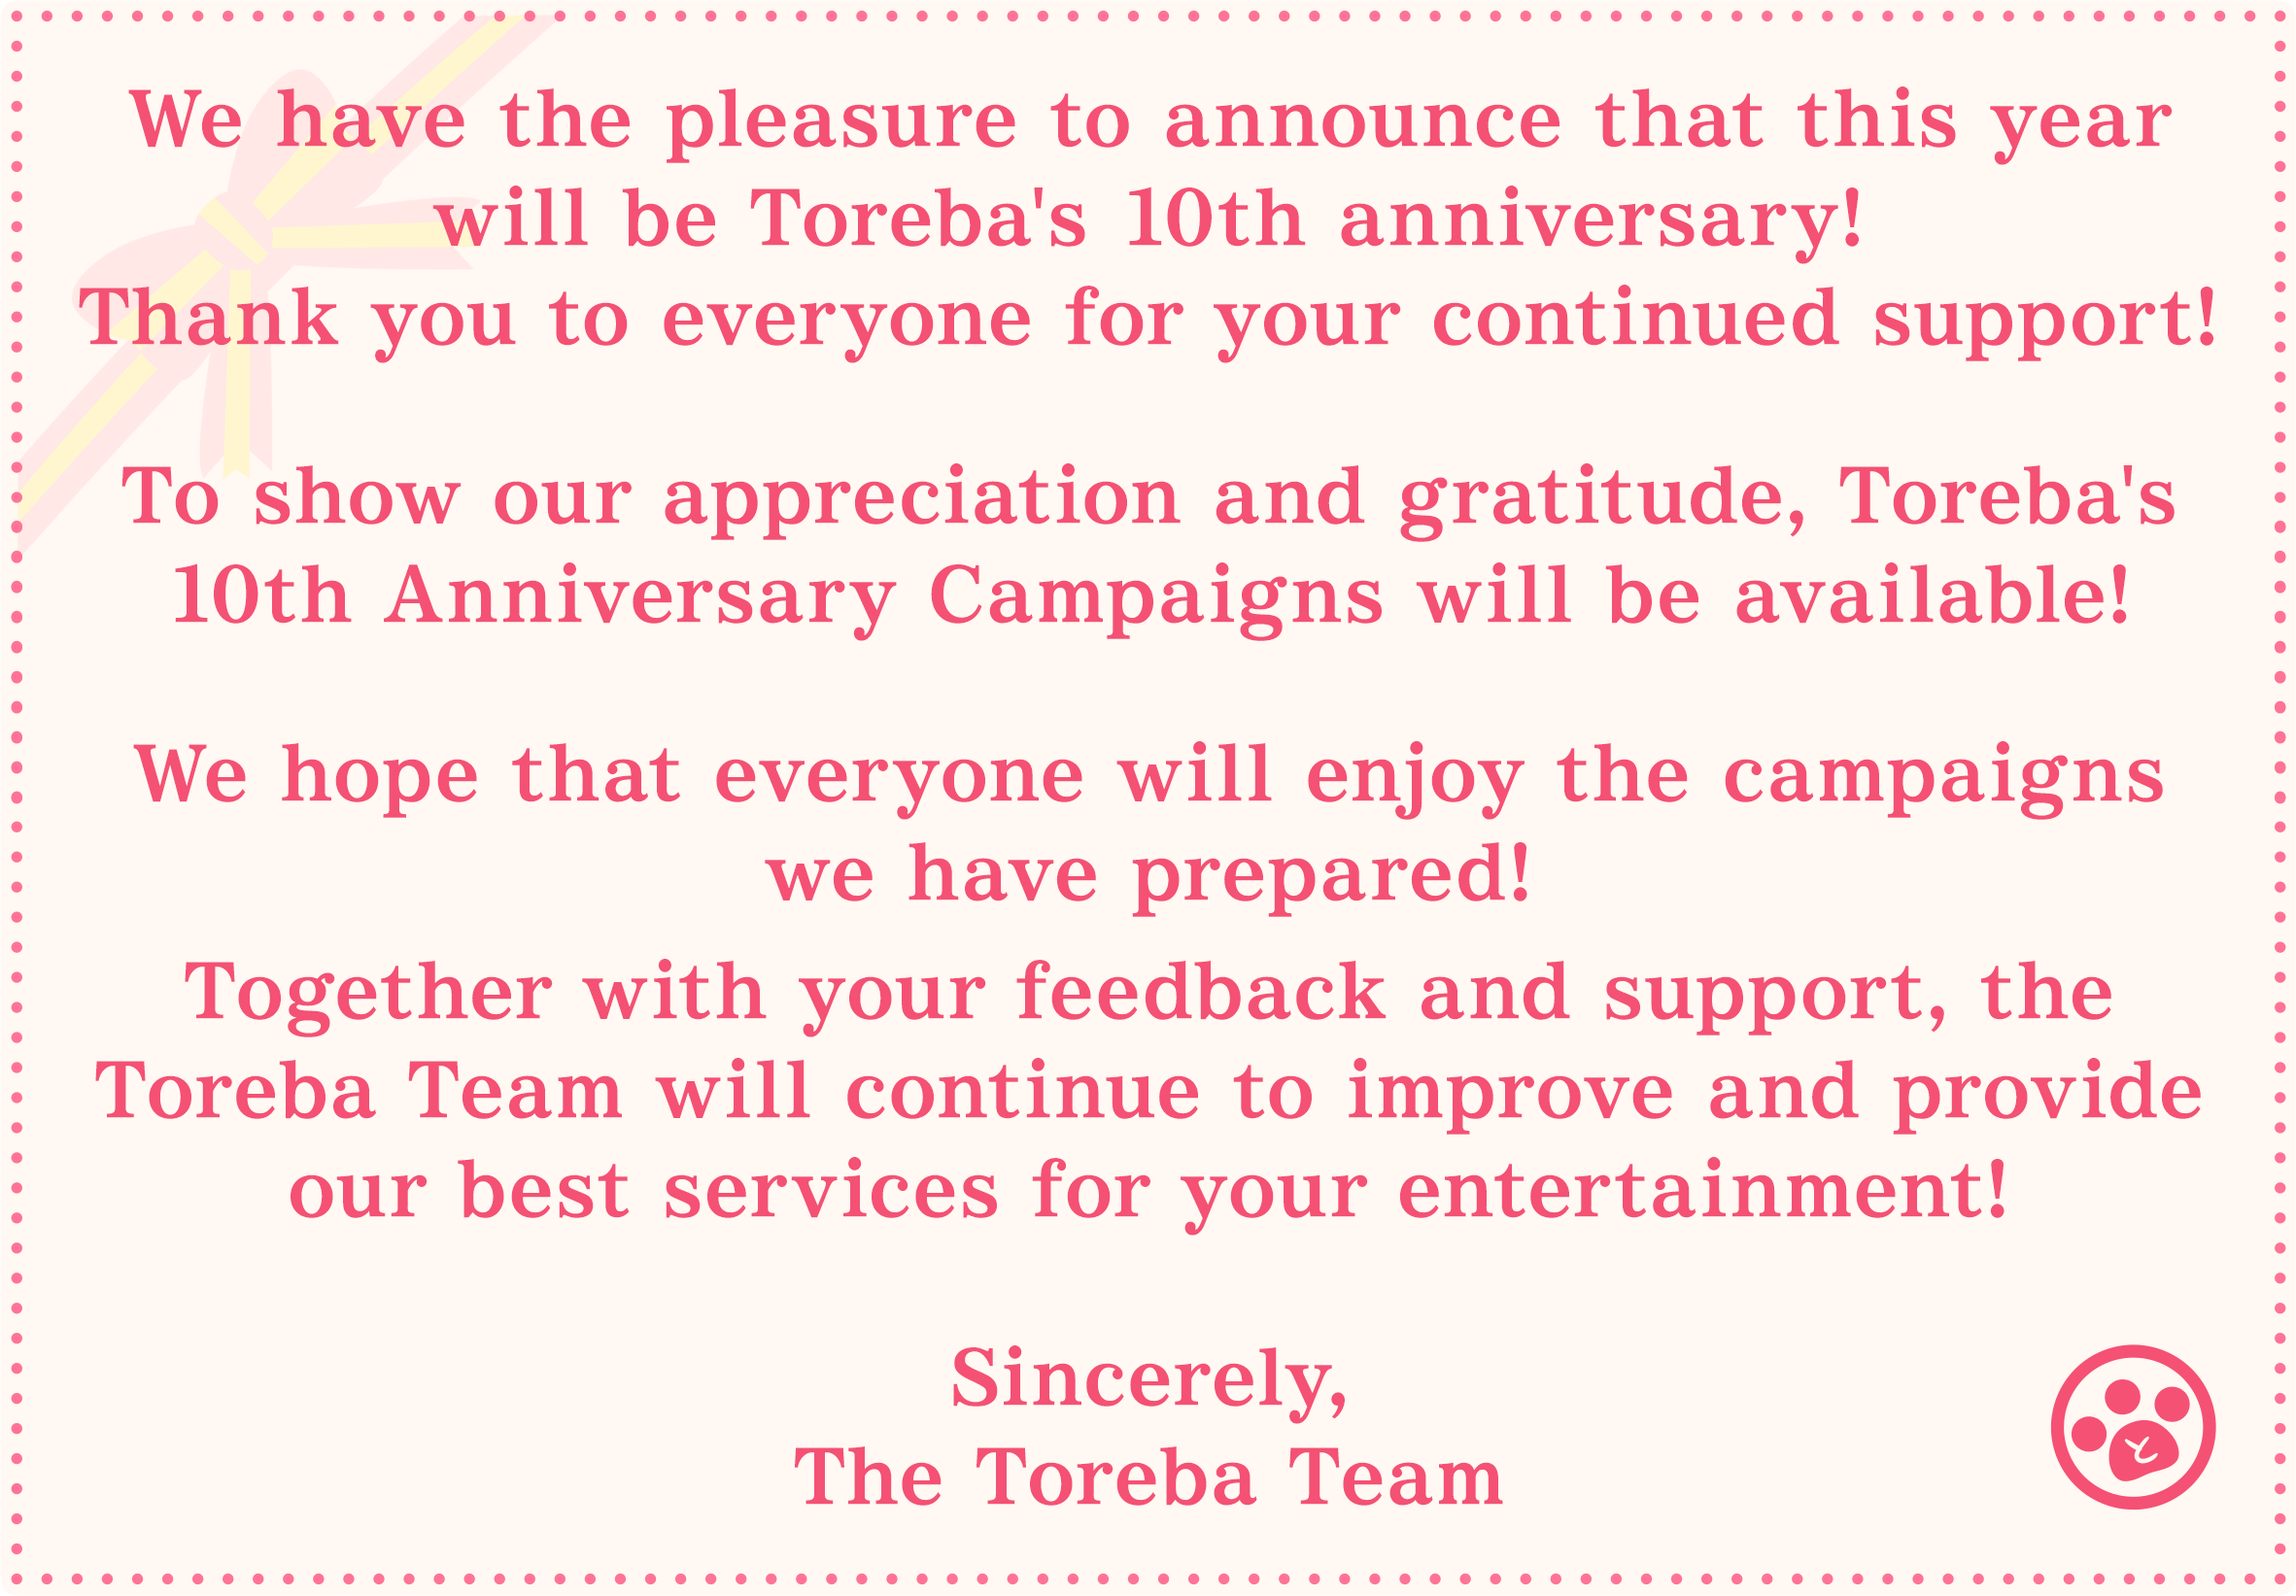 We have the pleasure to announce that this year will be Toreba's 10th anniversary!
Thank you to everyone for your continued support! To show our appreciation and gratitude, Toreba's 10th Anniversary Campaigns will be available! We hope that everyone will enjoy the campaigns we have prepared! Together with your feedback and support, the Toreba Team will continue to improve and provide our best services for your entertainment! Sincerely, The Toreba Team